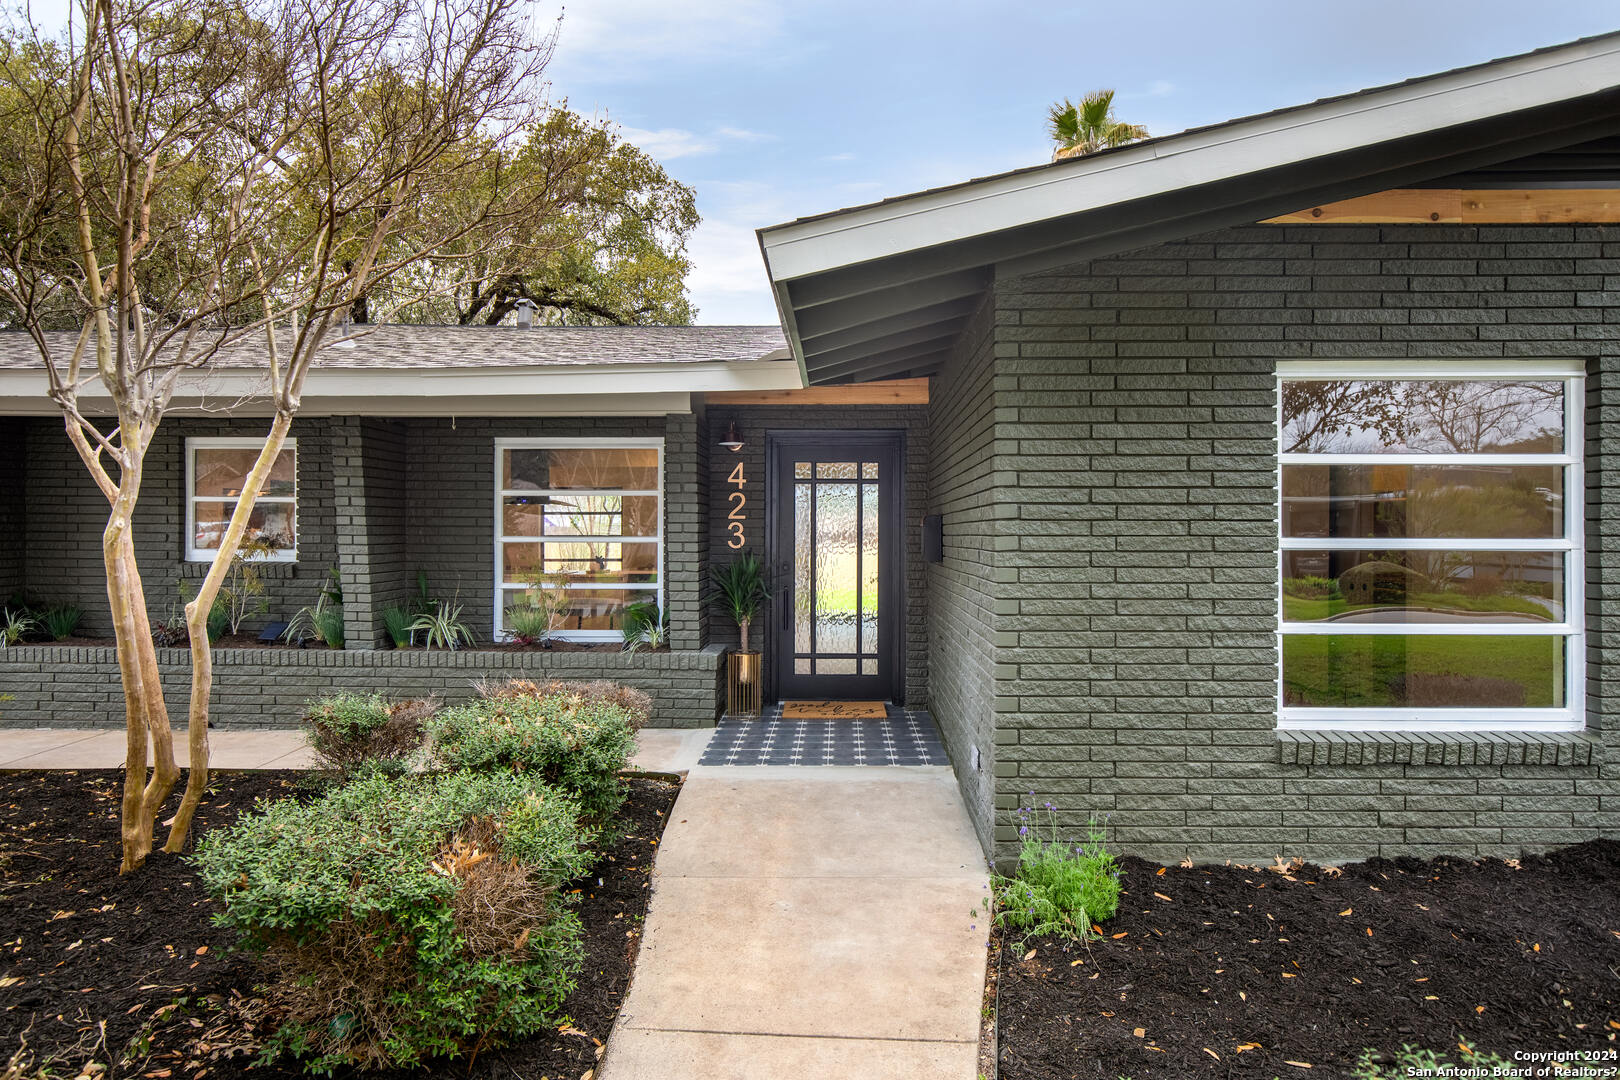 **OPEN HOUSE: Thu 3/28, 3pm-6pm, Fri 3/29, 3pm-6-pm, Sat 3/30, 1pm-4pm** Impeccably renovated, this sanctuary awaits on a picturesque Northwood street.  Every detail speaks of thoughtful design, from the luxury vinyl flooring to the bespoke two-tone cabinets and lavish leathered granite and quartz countertops in the kitchen. Escape to the spa-like bathrooms featuring custom floating wood and granite vanities, alongside rainfall showers and meticulous tile accents. Seamlessly blending luxury with practicality, discover a dedicated office space and a generous game room for leisure. Step outside to the covered tiled patio and outdoor grilling area, offering a tranquil retreat. You'll be enamored by this custom curated home.